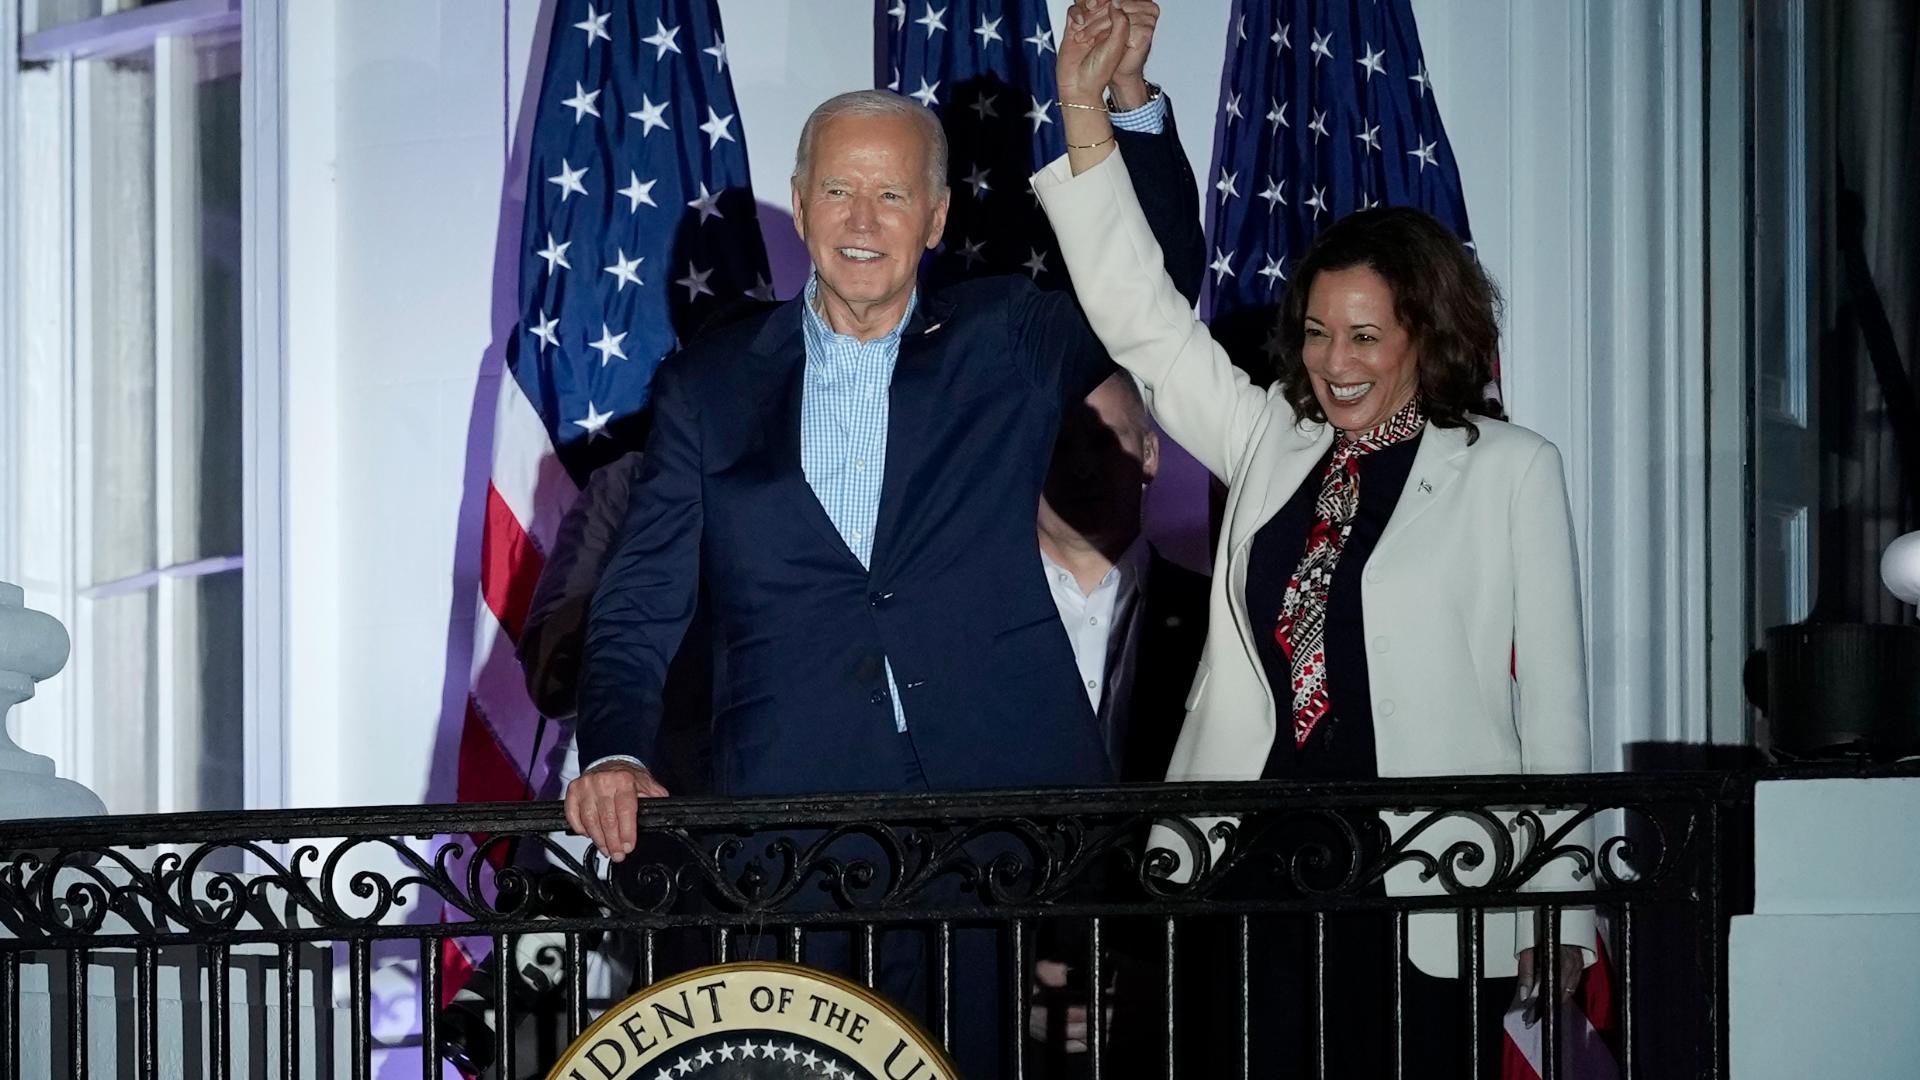 Here's what happens now that Joe Biden has announced that he won't seek reelection.